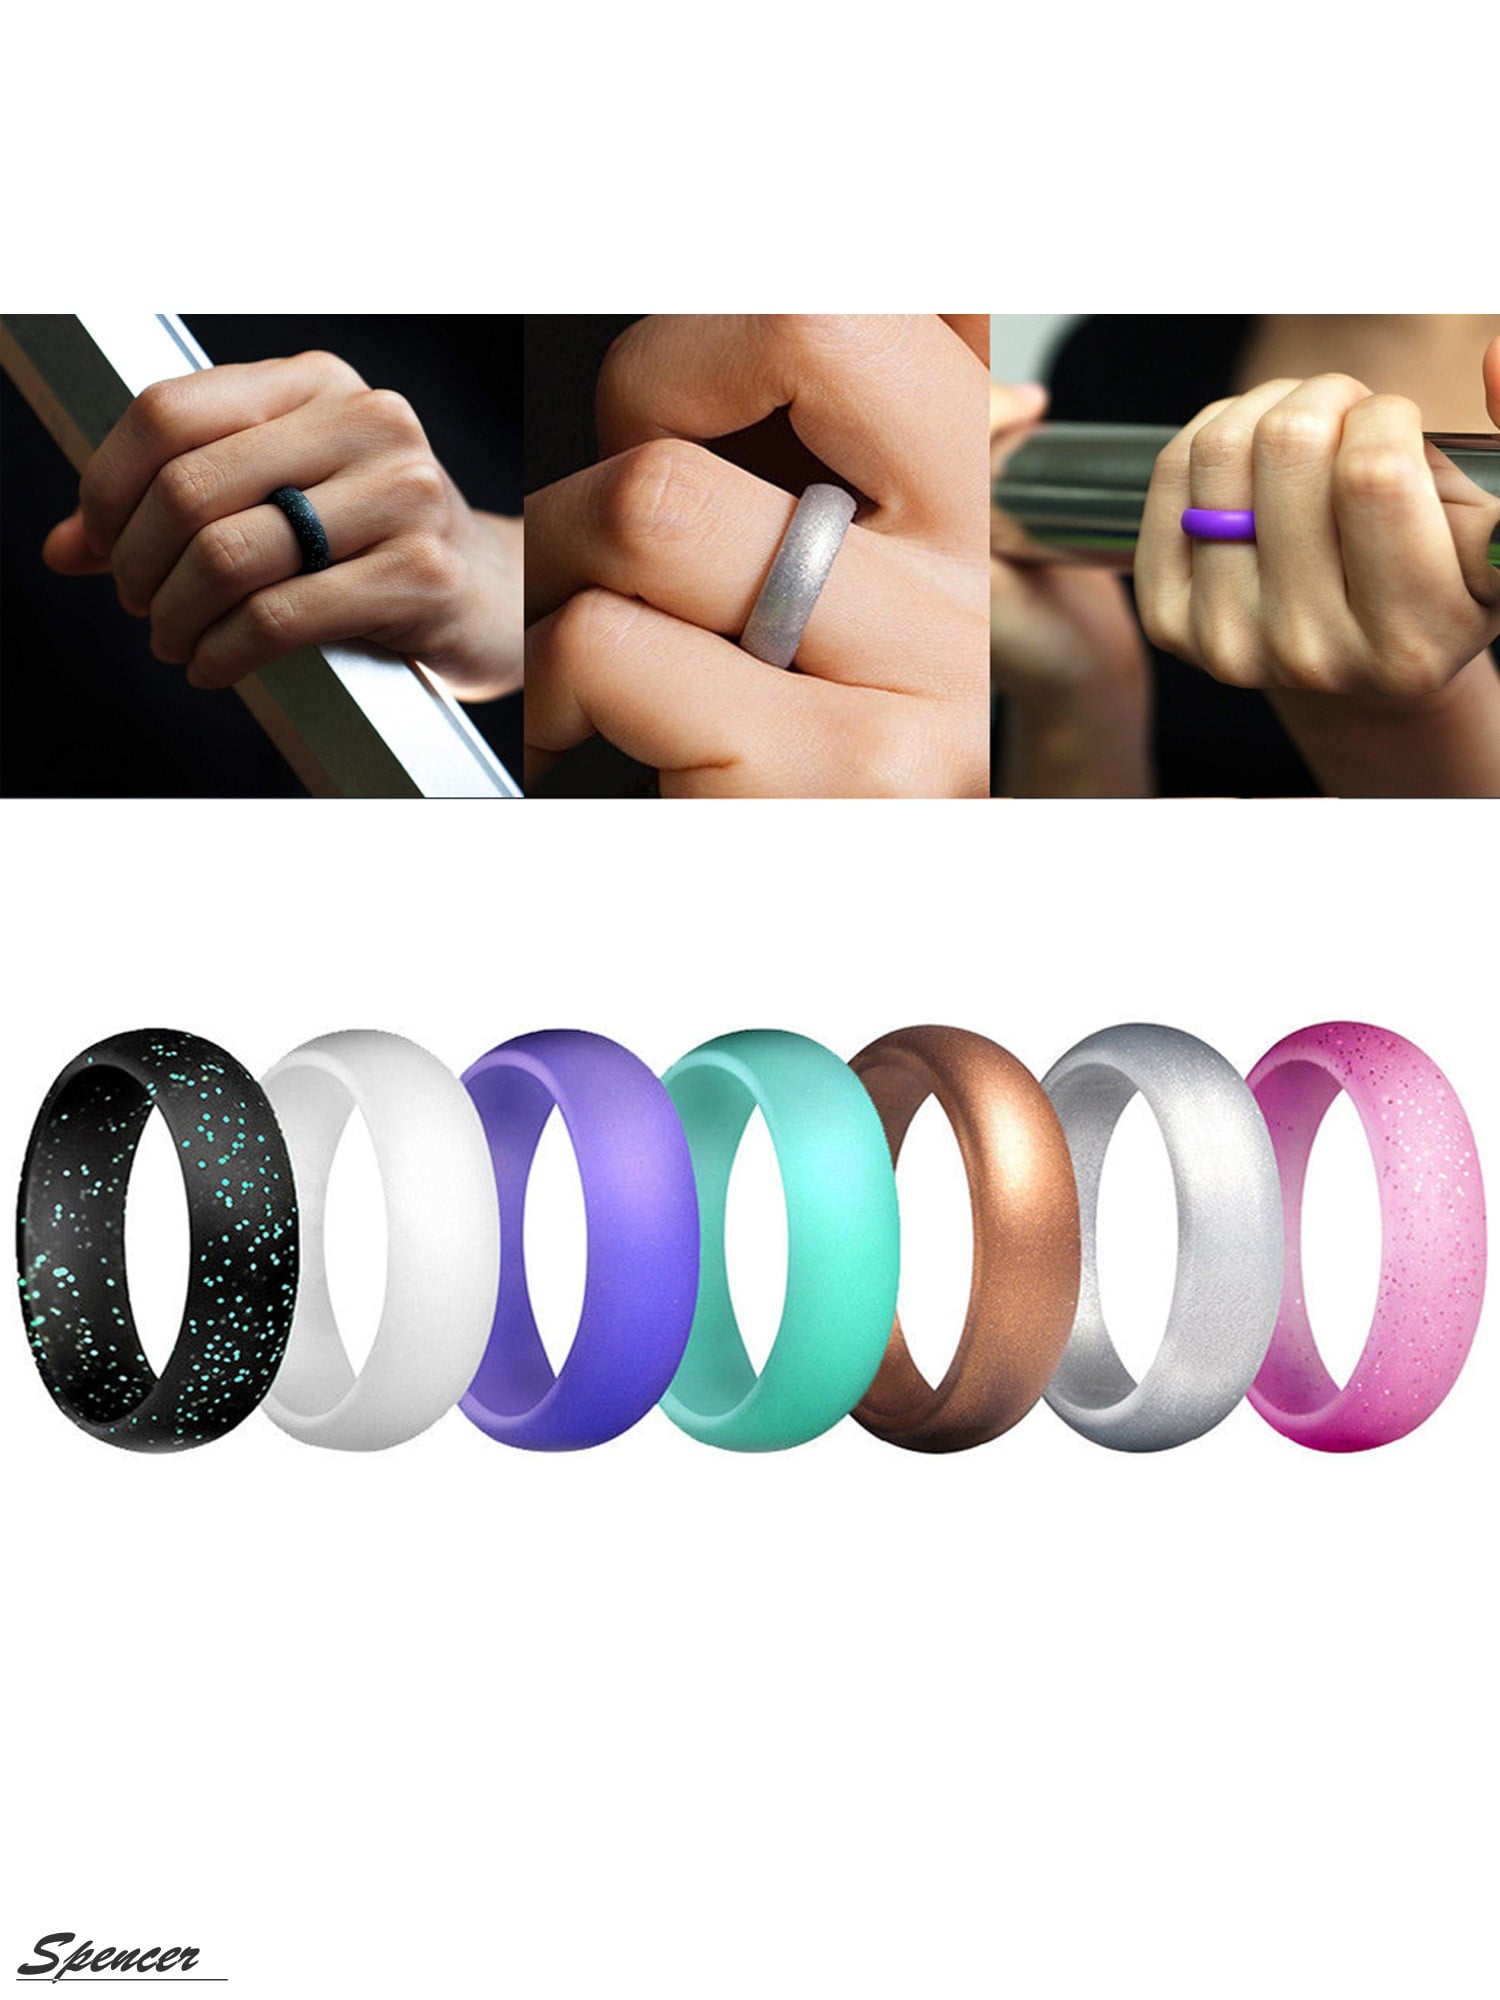 10 Pcs Women Silicone Wedding Ring Rubber Band Modern Durable Size 5 6 7 8 9 